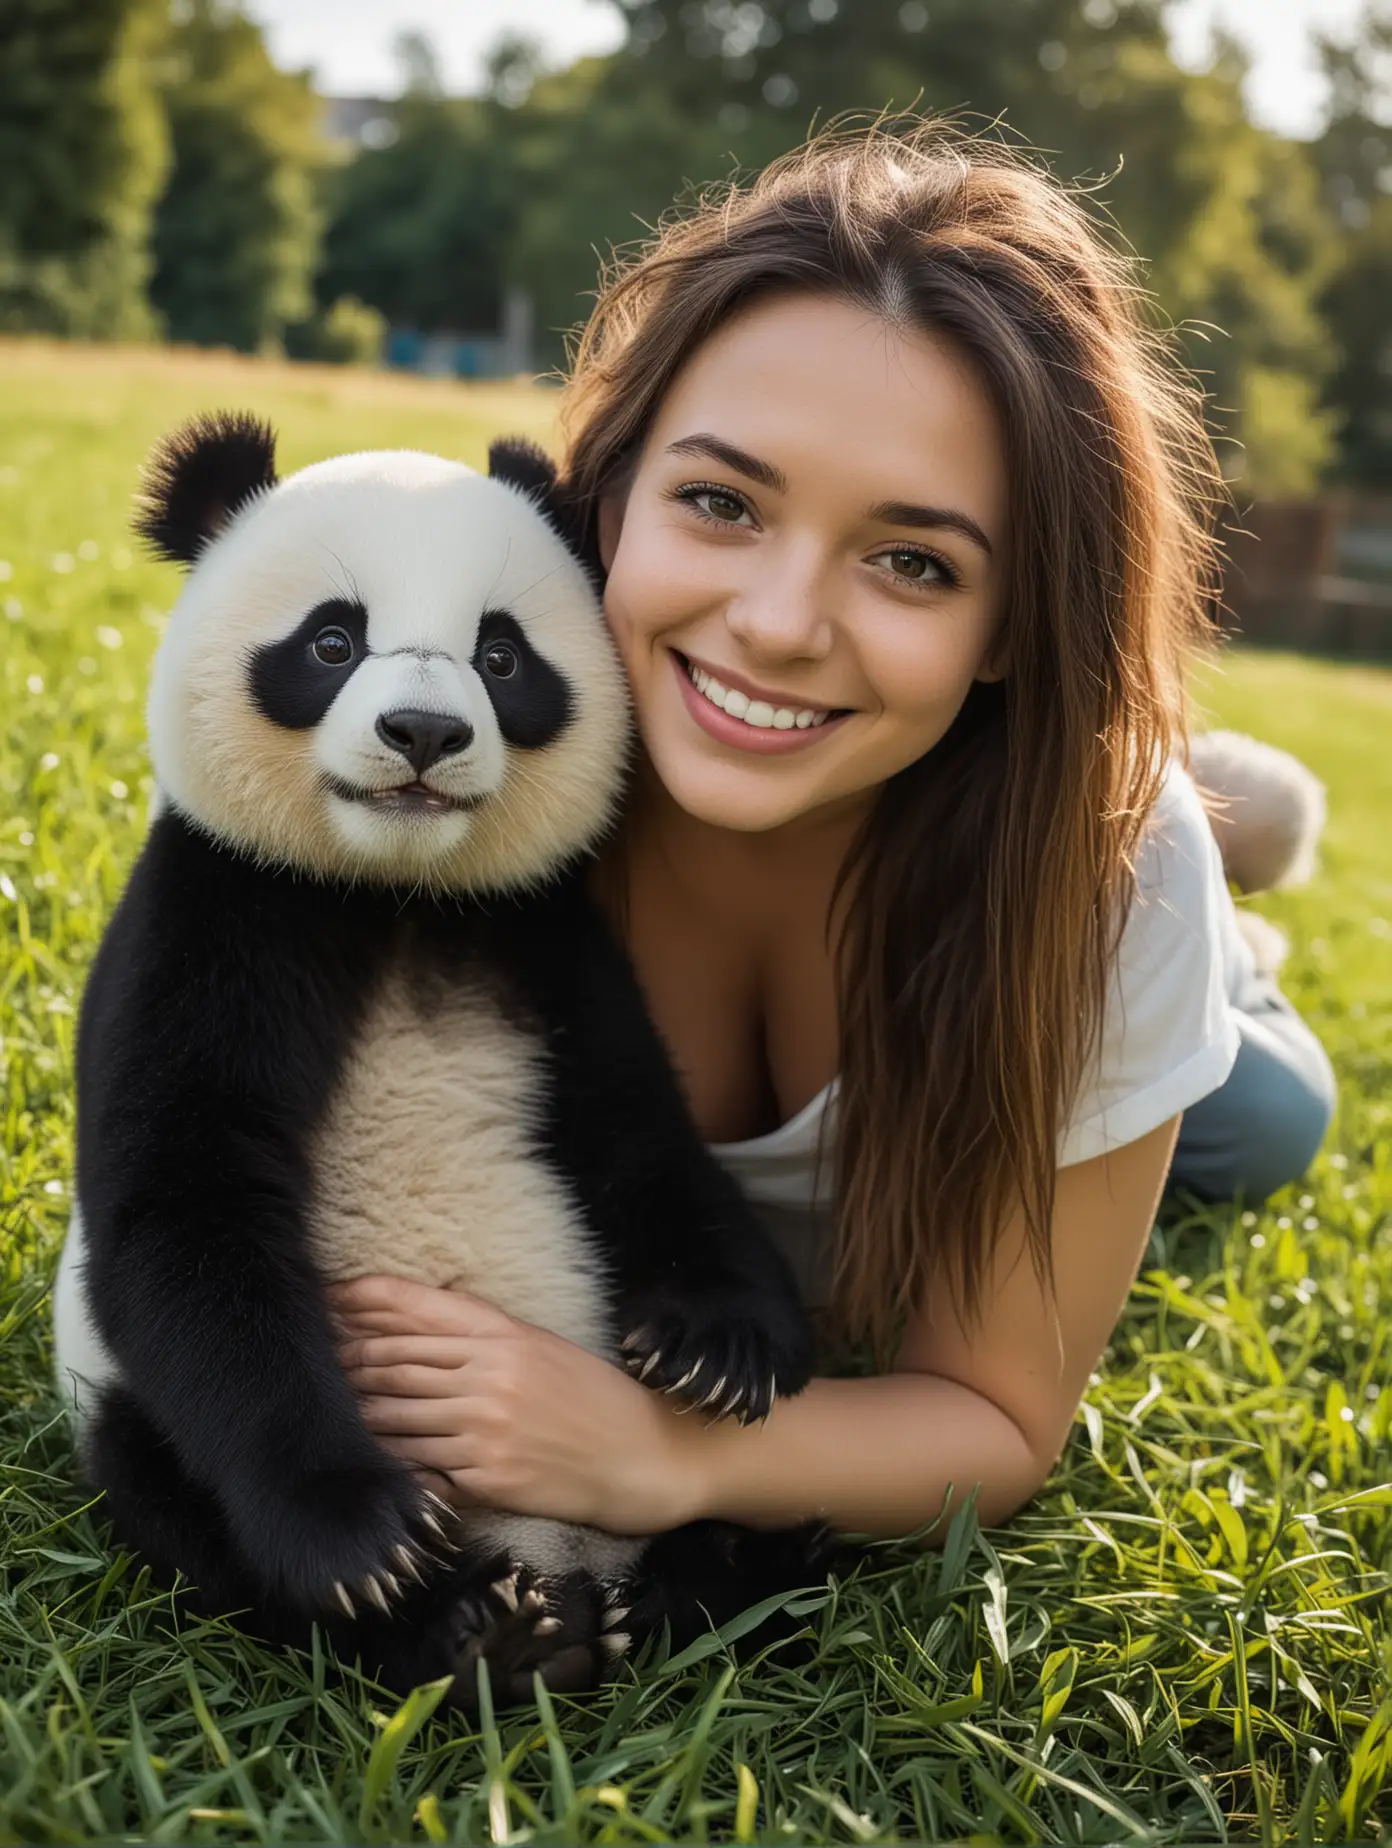 Europeans and Americans a beautiful young woman smiles for the camera and takes a photo with a panda on the grass outdoors on a sunny day. This photo was shot Sony A7c style using a 35mm f/2 lens for a realistic look.